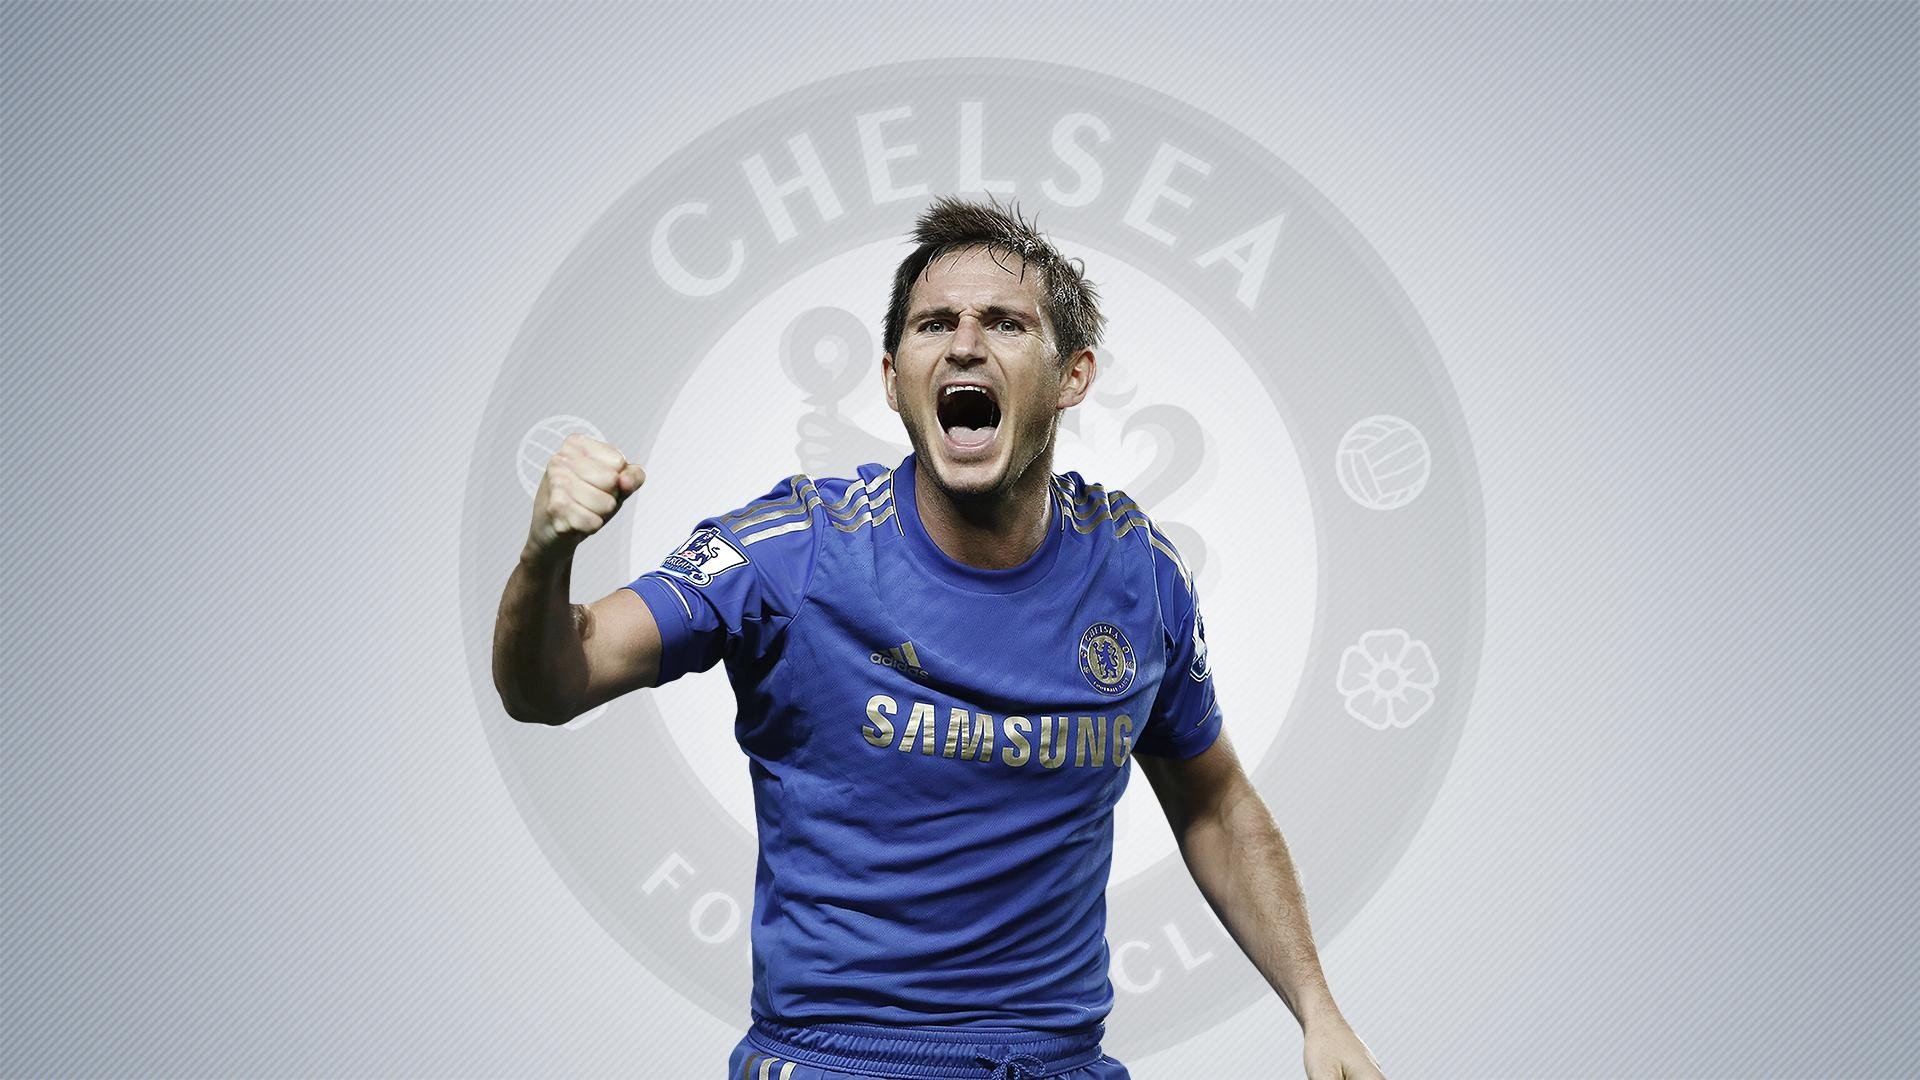 Awesome Chelsea F.C. free wallpaper ID:101163 for hd 1920x1080 desktop